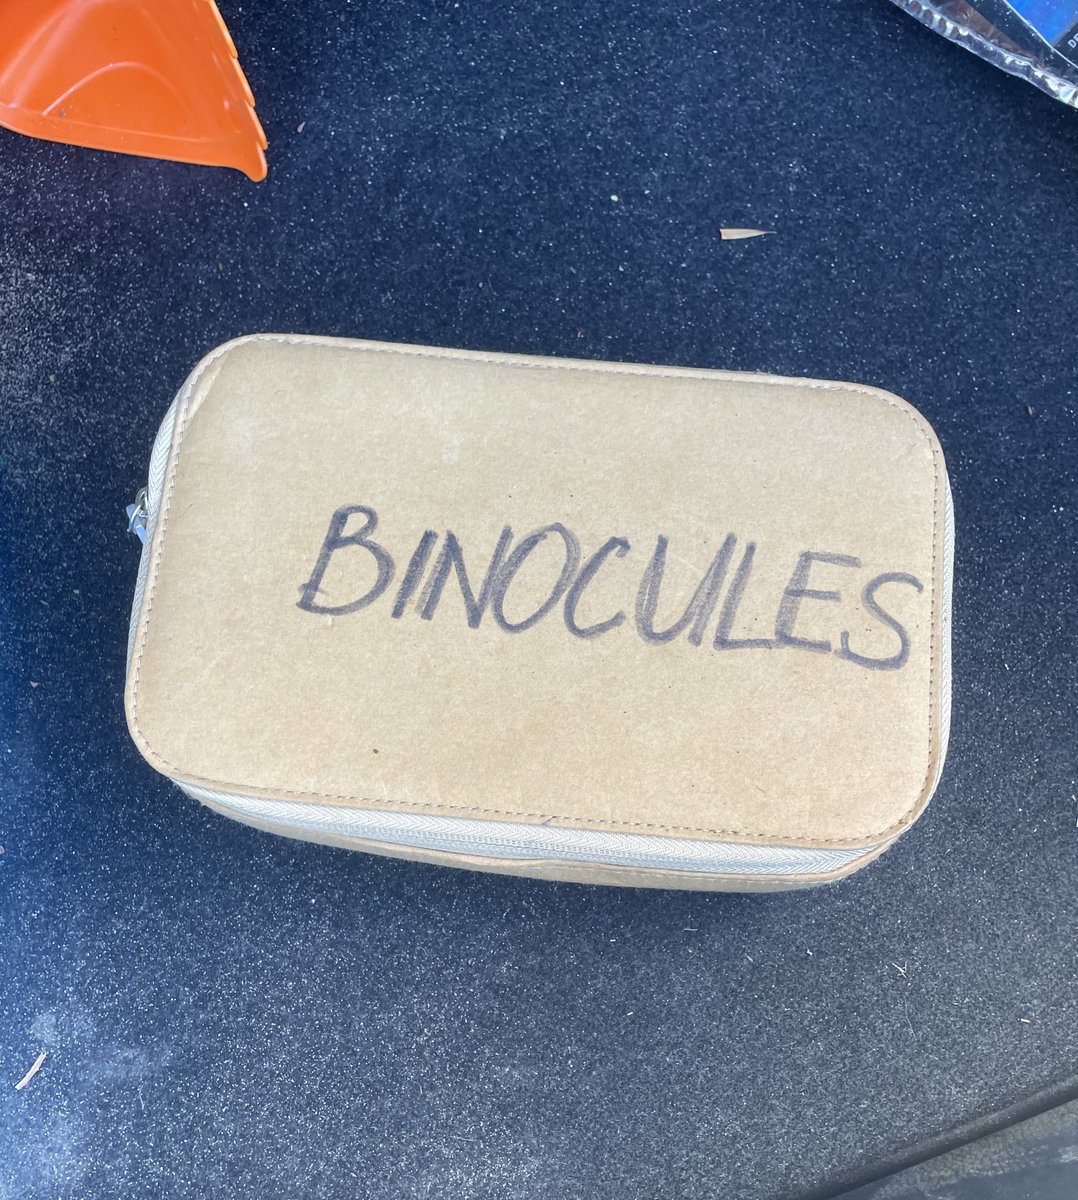 Disappointed to report this case contained binoculars and not bionicles